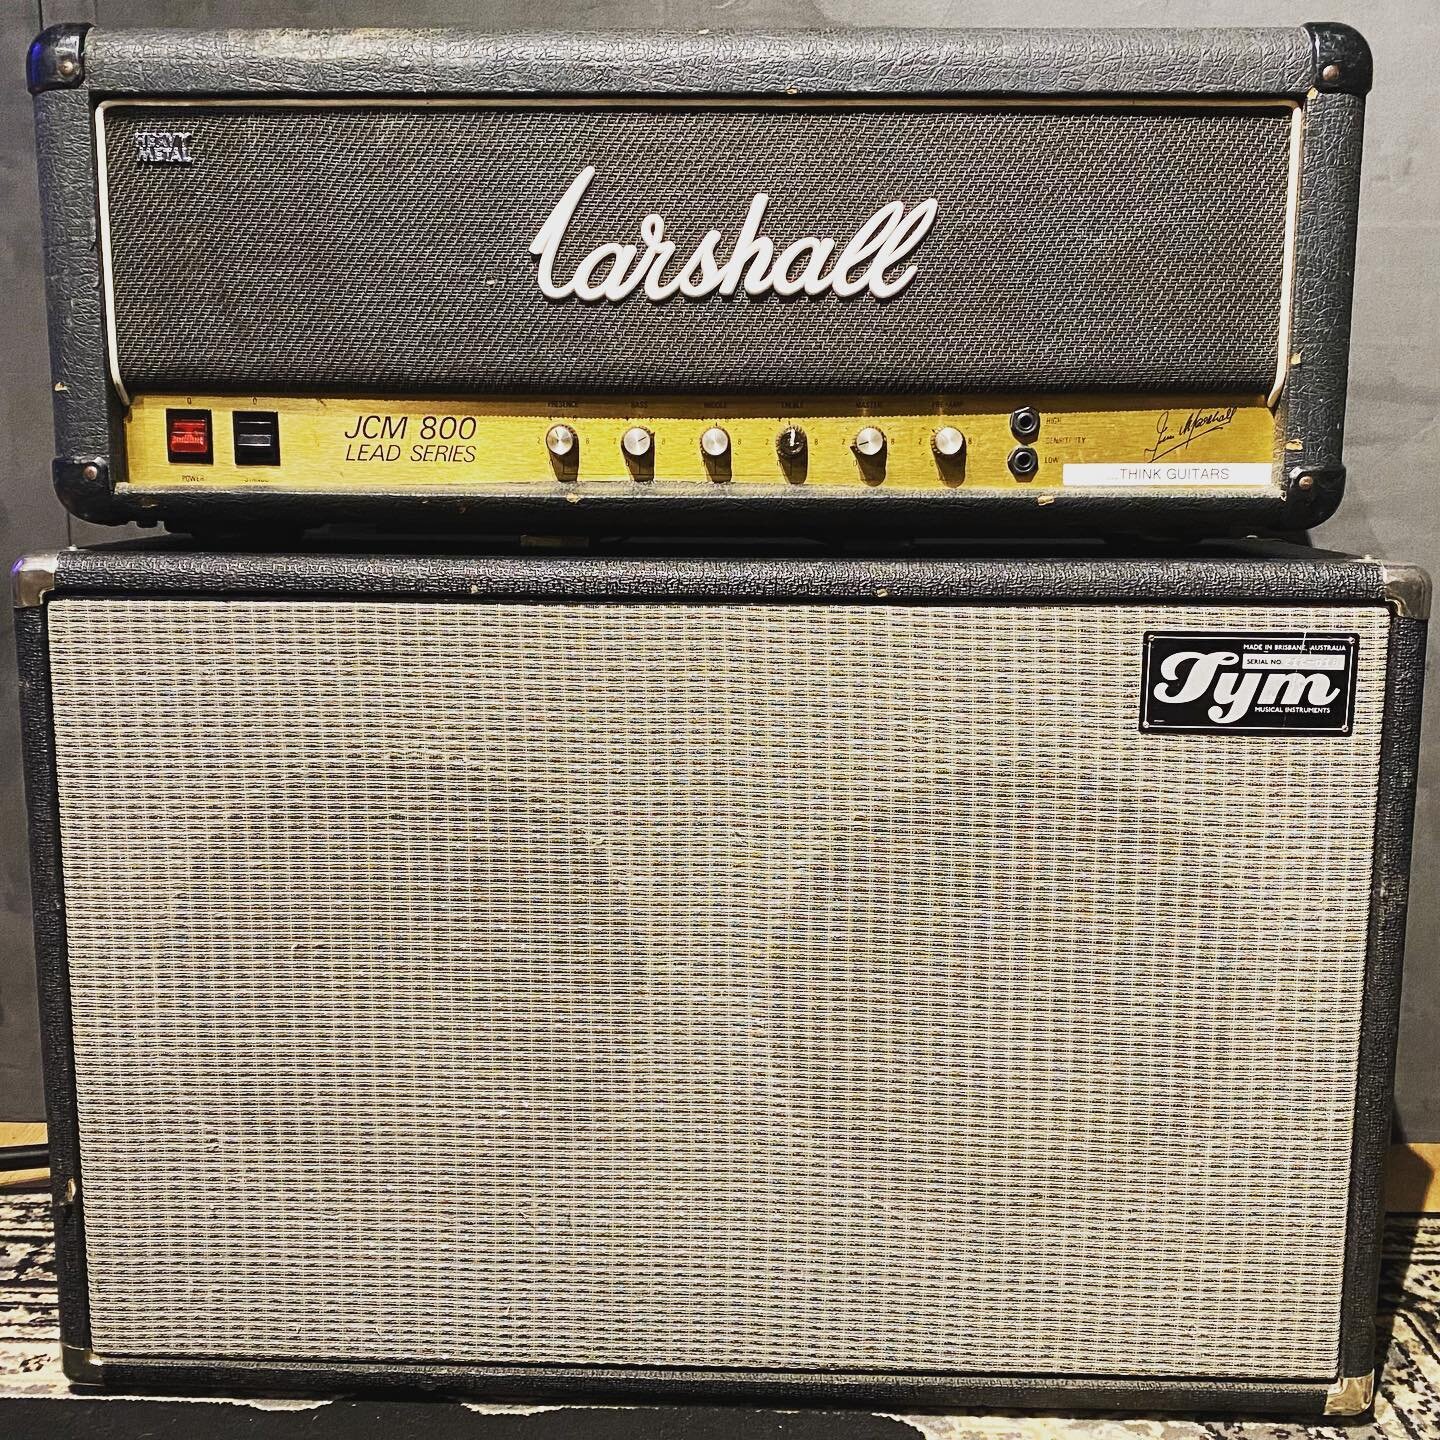 A classic. This amp has toured 🇦🇺 with me many times. Was my amp for @onedollarshortband for a big chunk. I almost sold it a few years back because I rarely use it these days. But dang - Humbucker, into a OD into this thing and it&rsquo;s just SO g